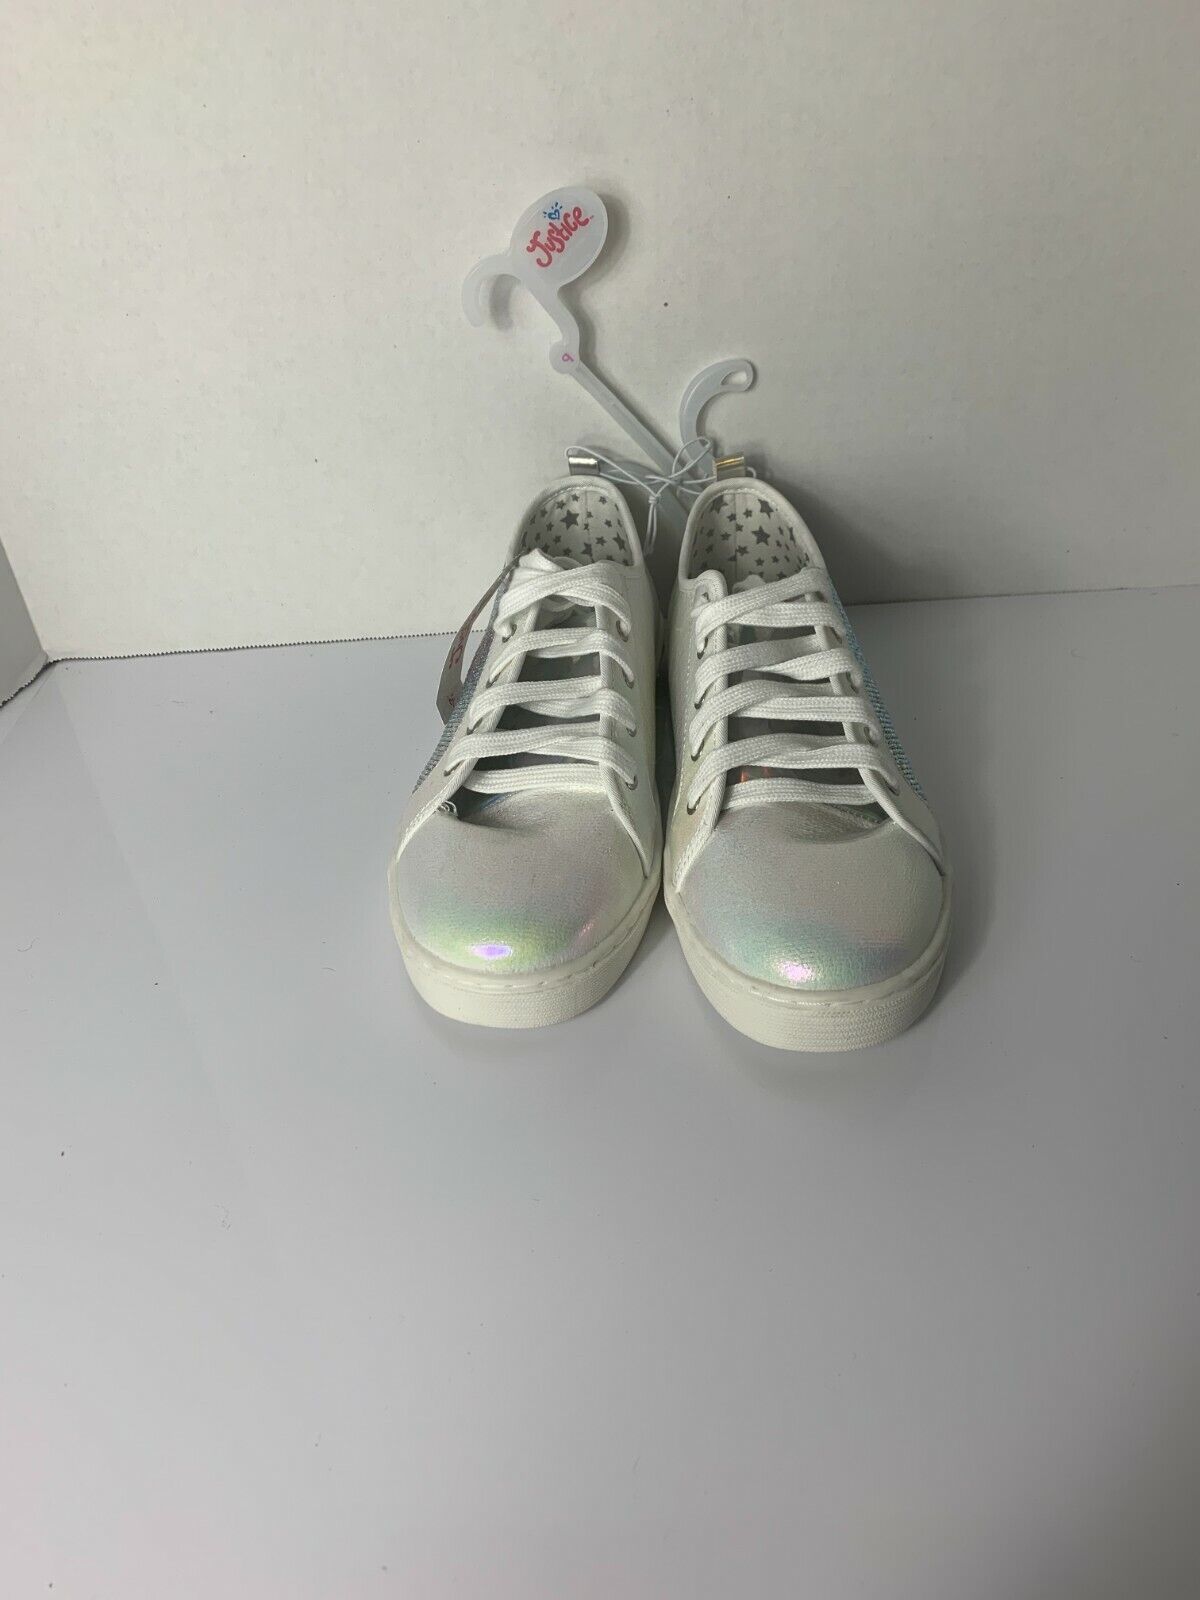 NEW Justice Sneakers, Silver Girls Sz 9